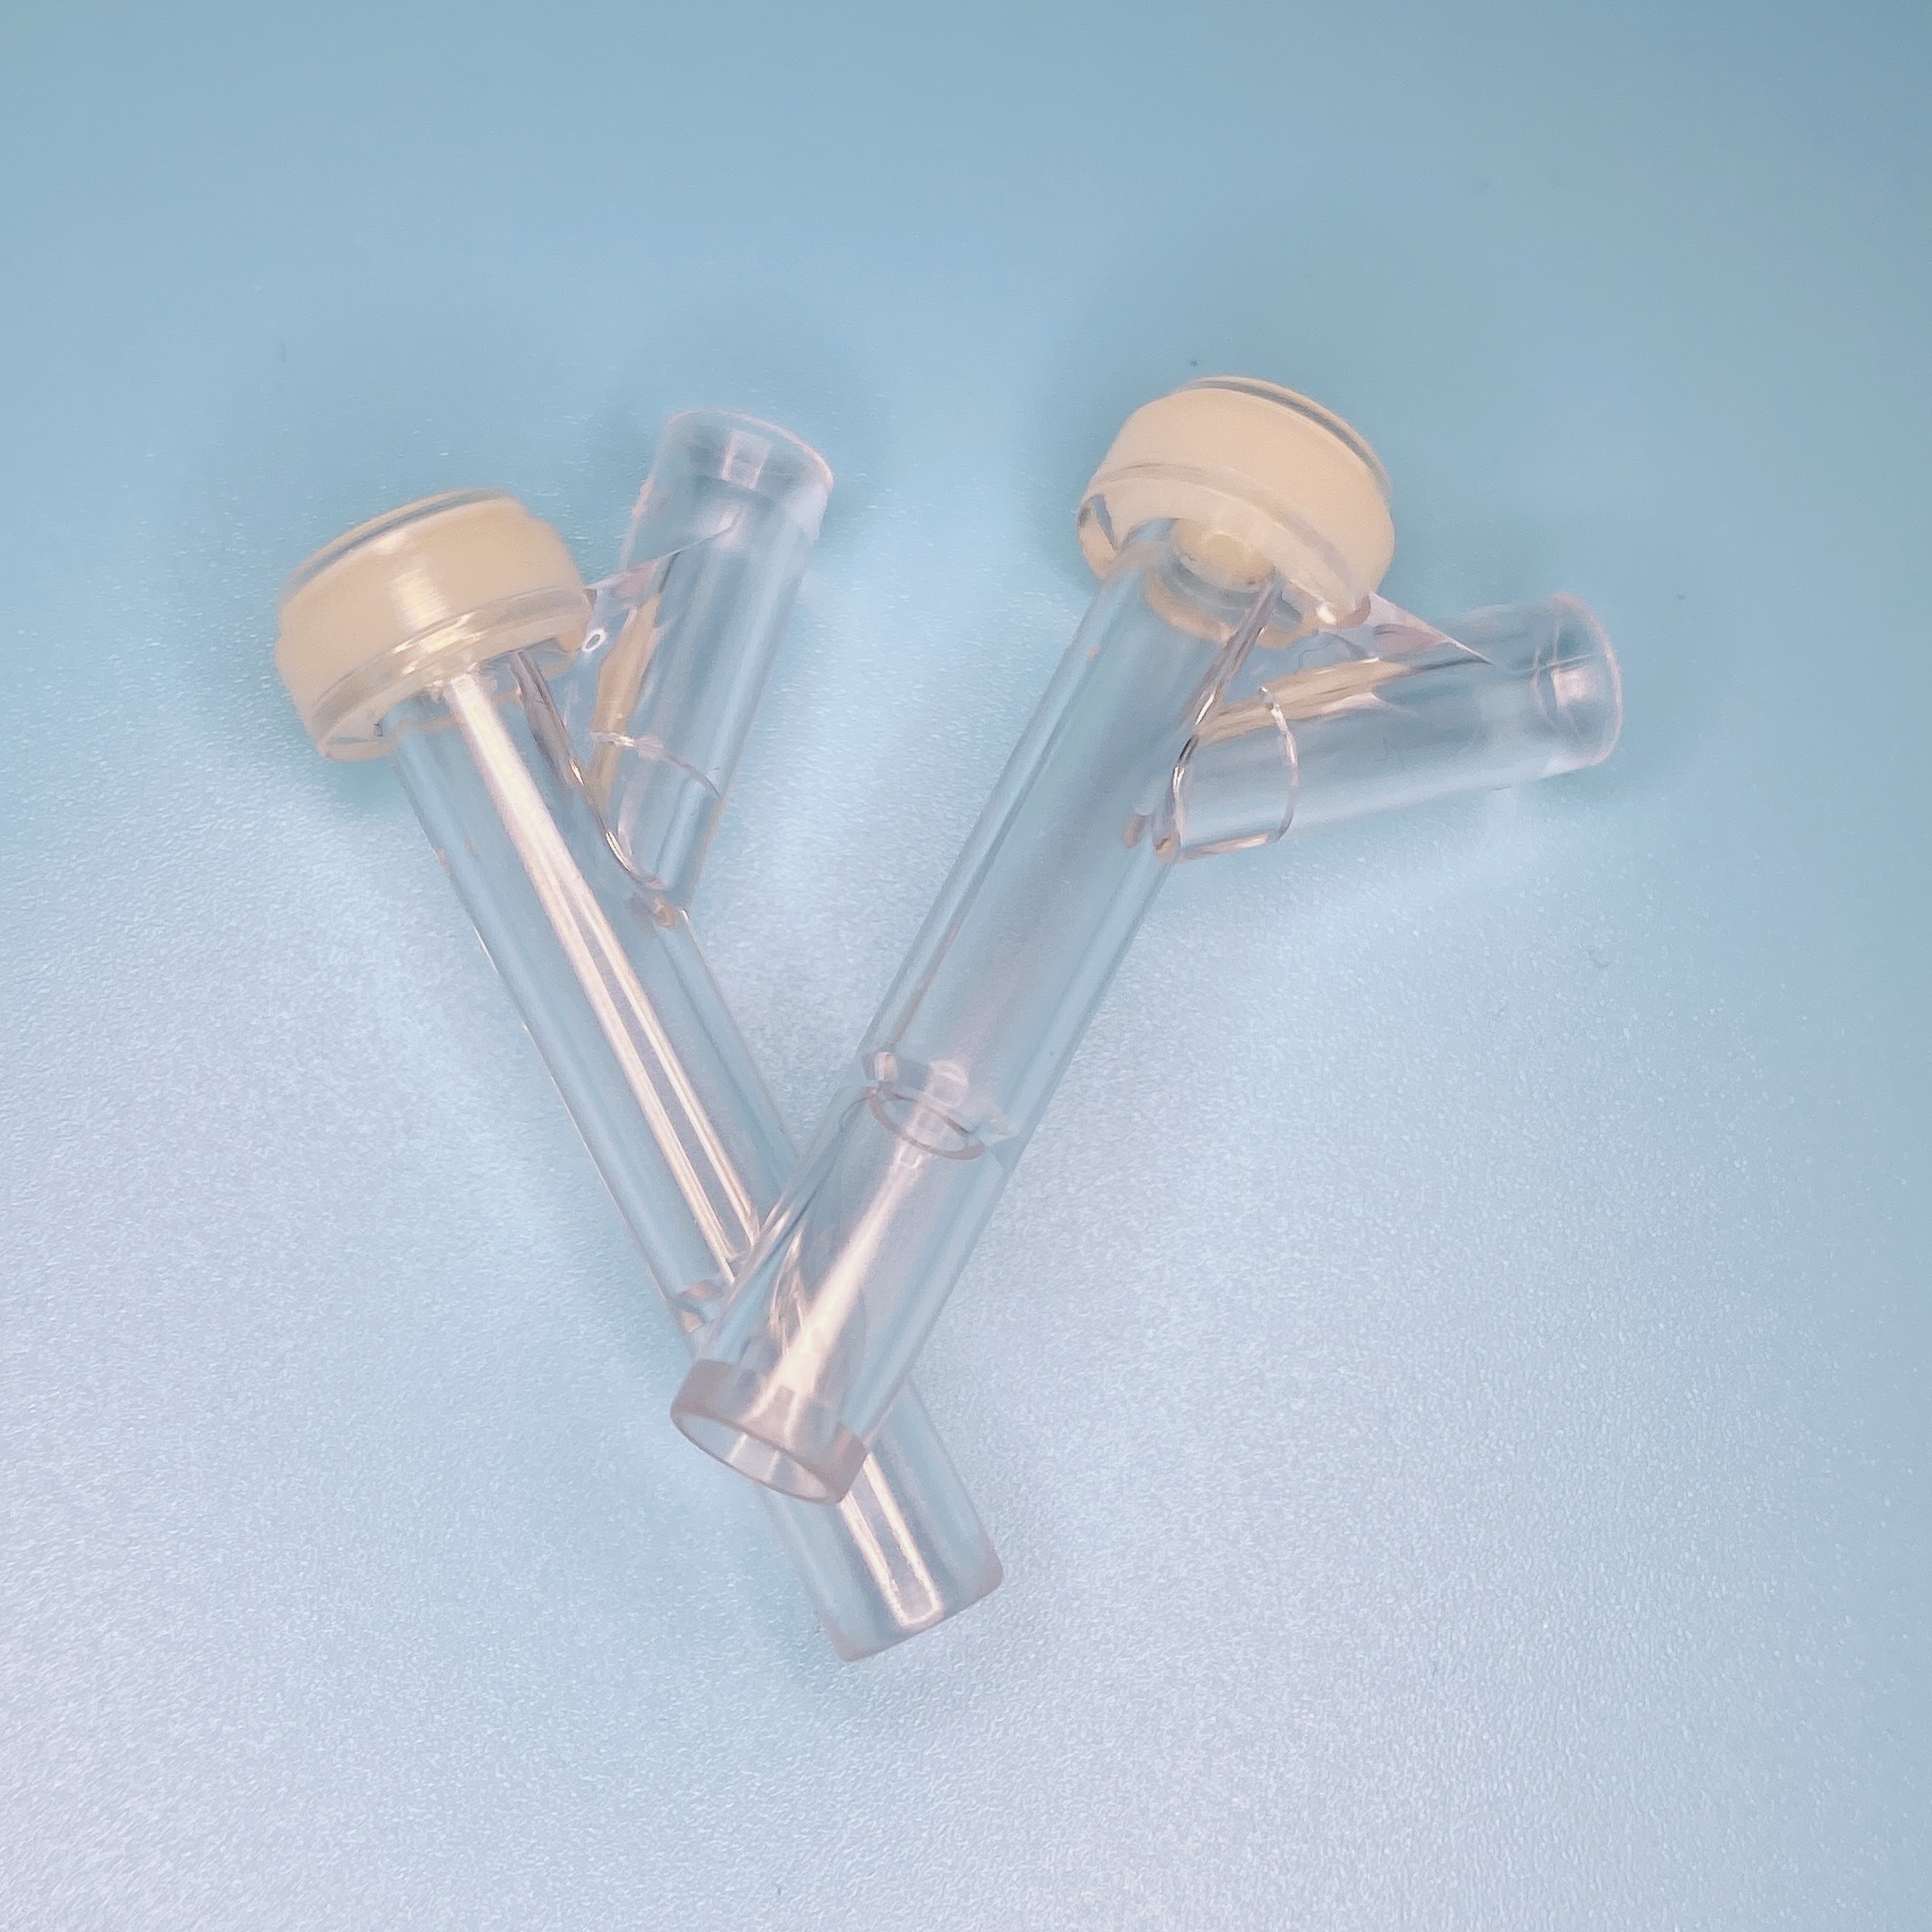 Medical Components Y injection port site for infusion set Light-Proof